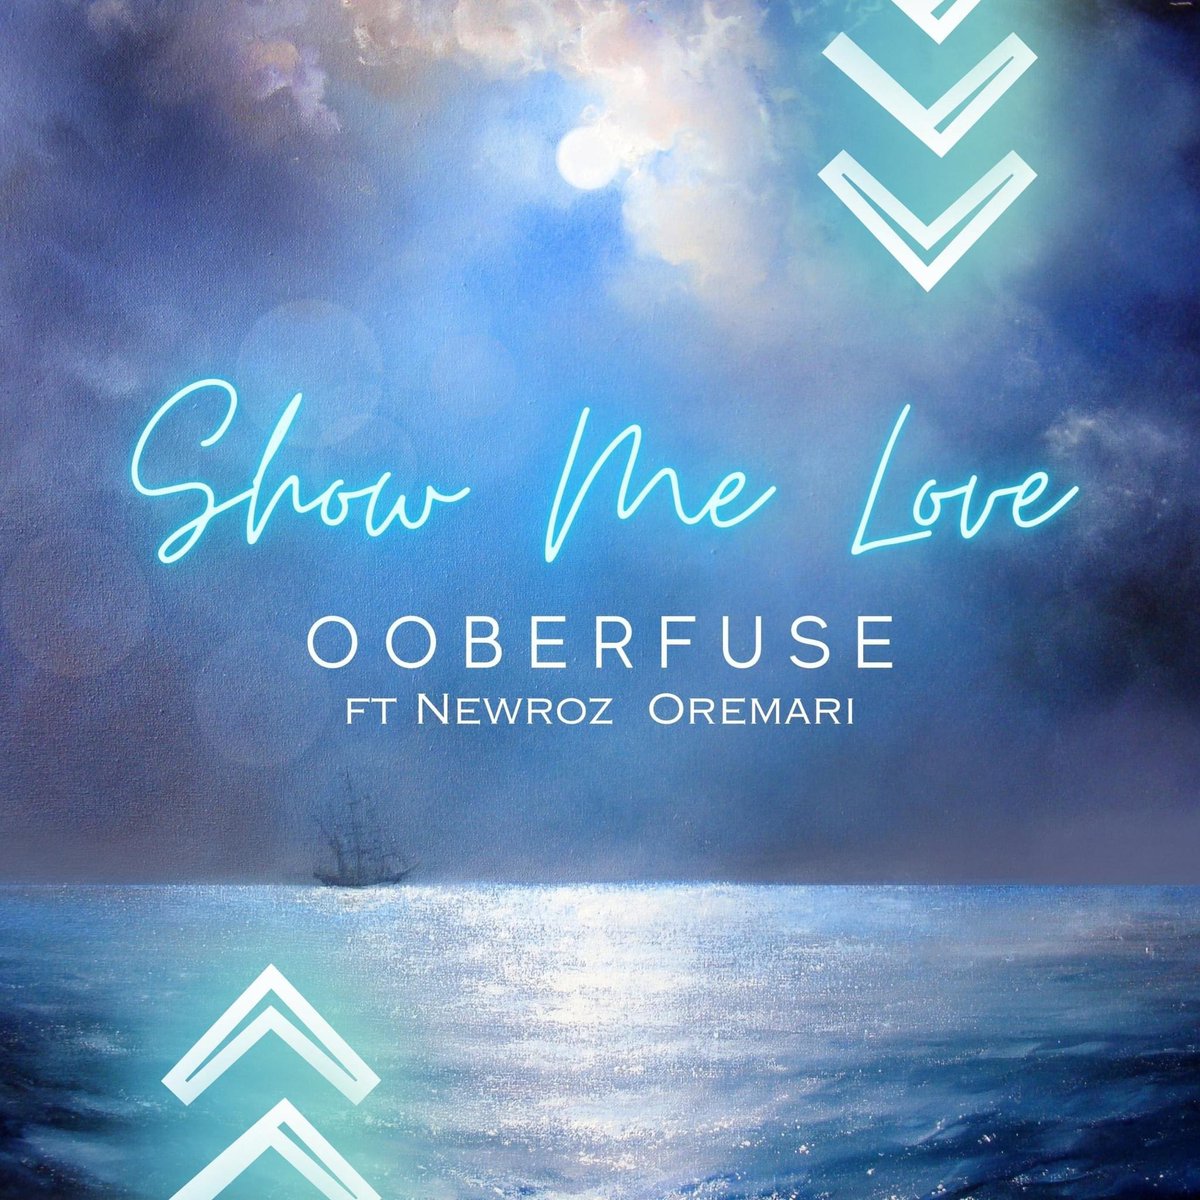 The new single from @ooberfuse FT Newroz Oremari #showmelove 16.6.23